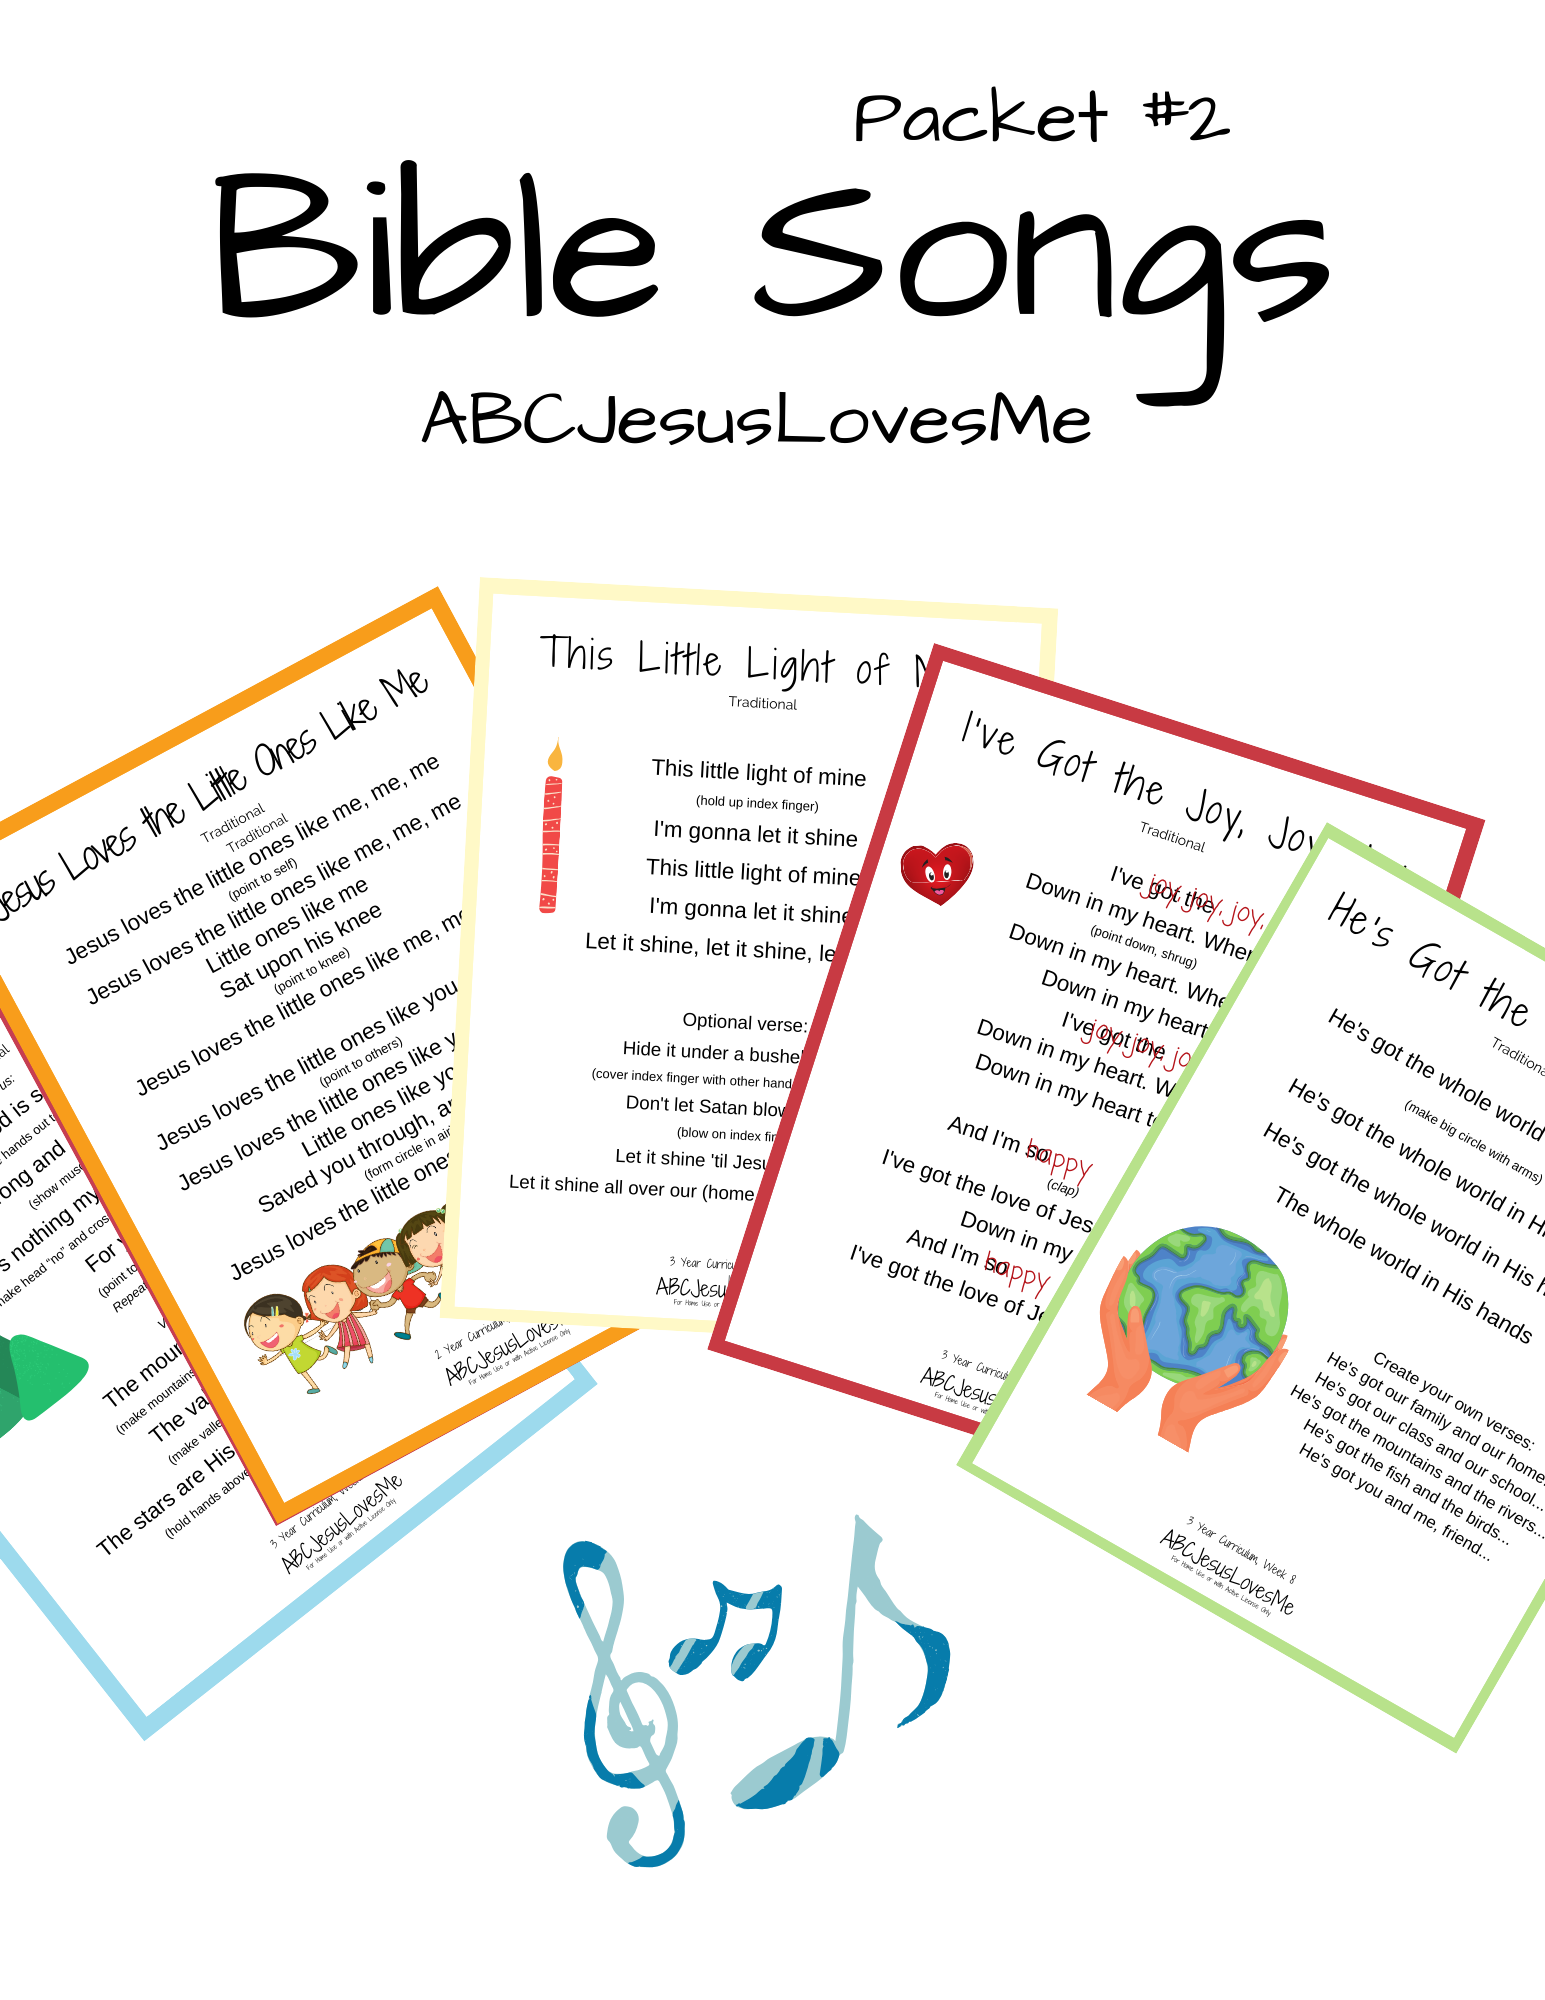 Bible Song Packet #2